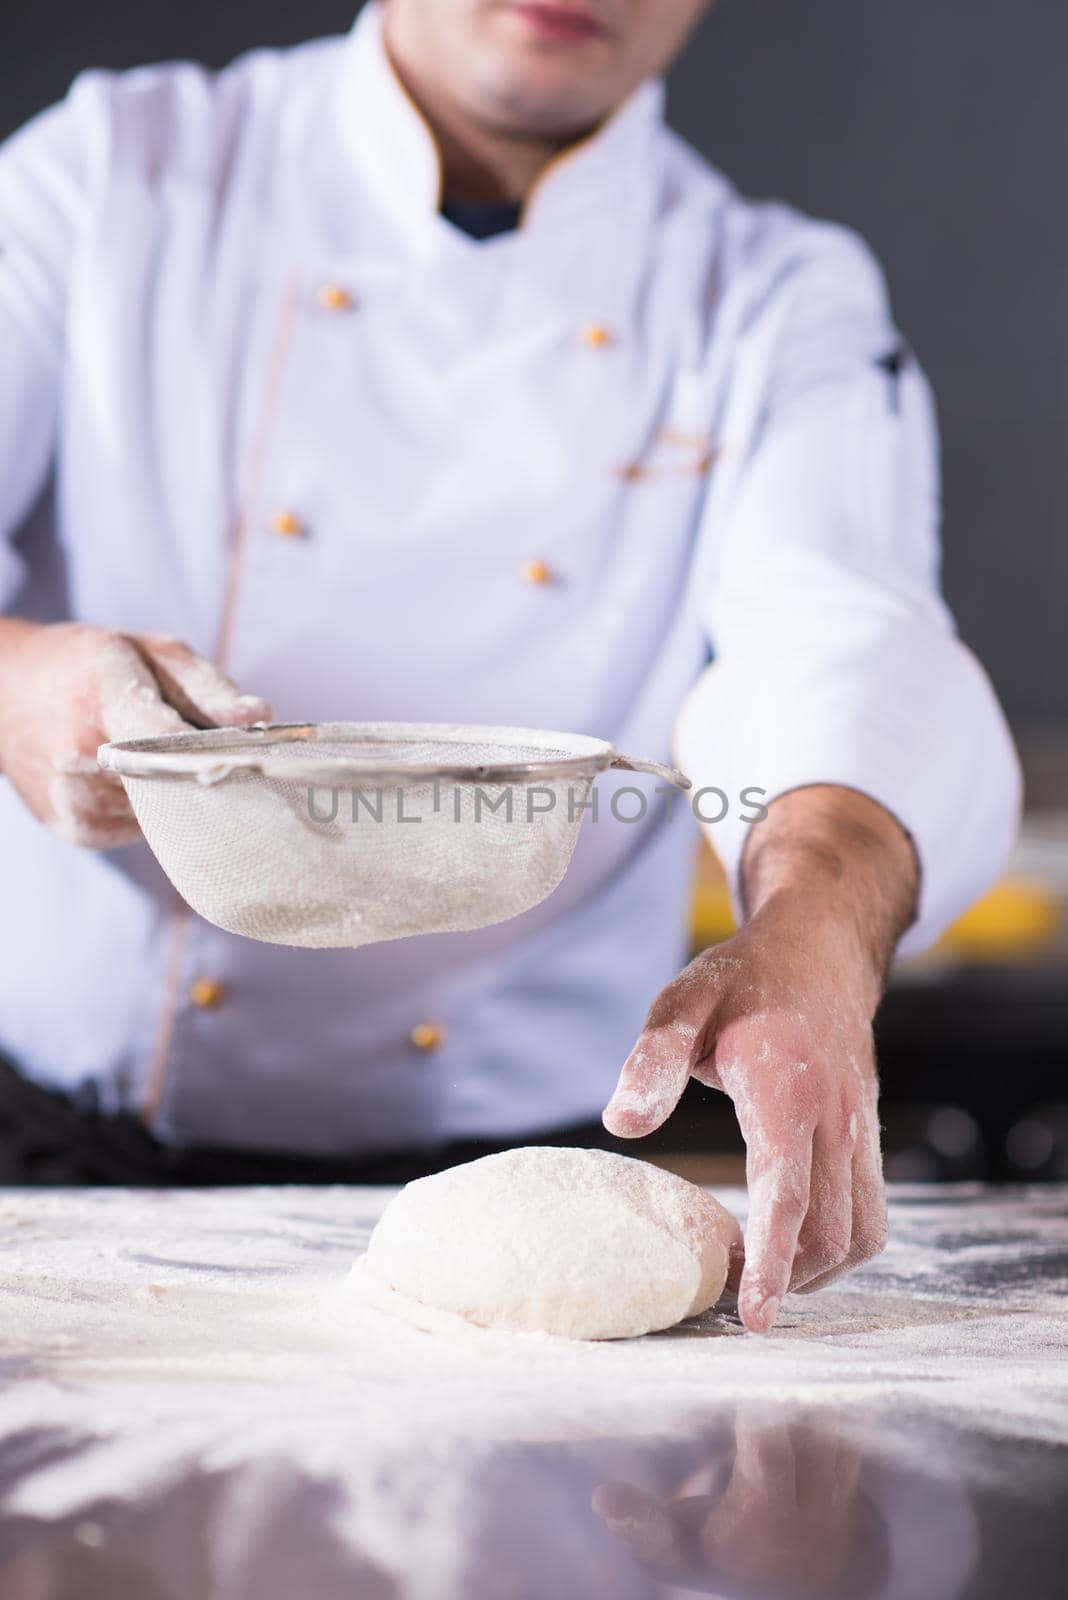 chef sprinkling flour over fresh pizza dough on kitchen table